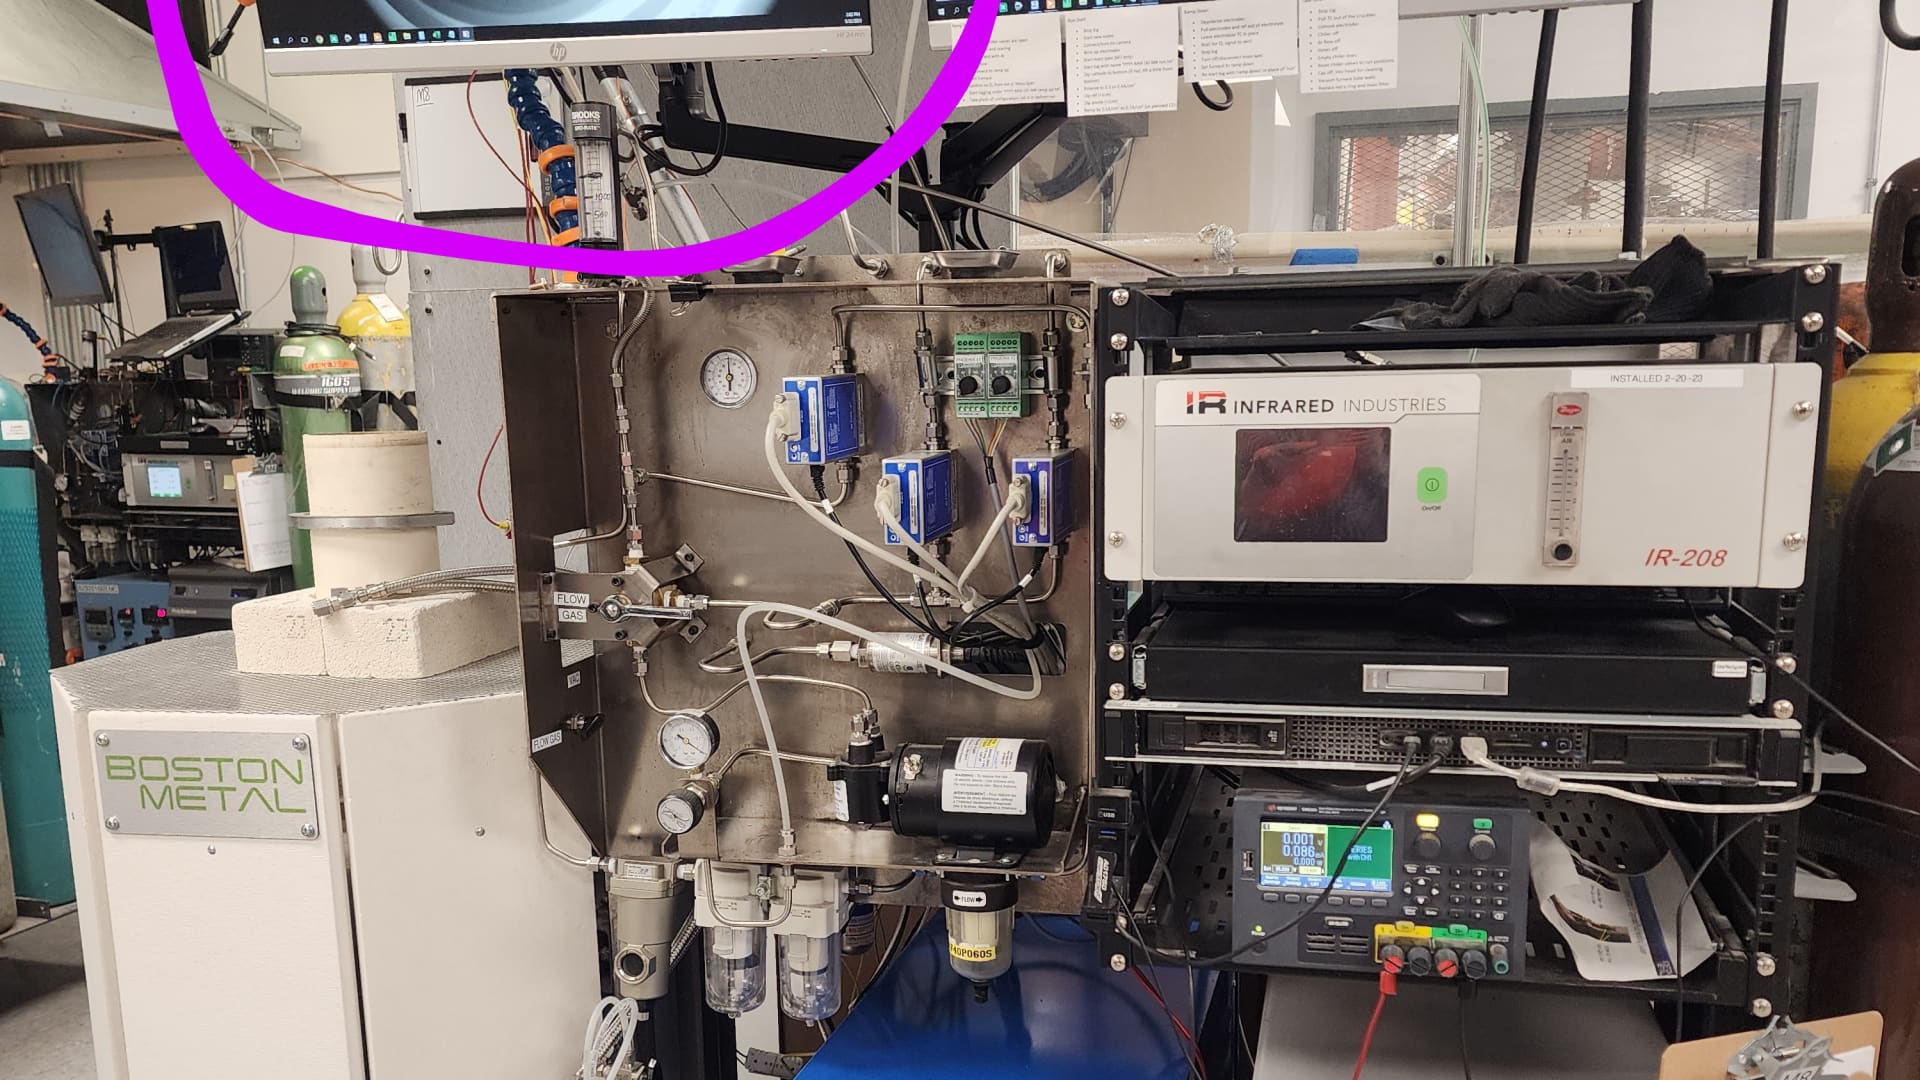 The Boston Metal electrolysis process releases oxygen as a byproduct. On the screen circled, oxygen bubbles can be seen being released.(The text on the white board has been blurred out to protect the intellectual property of Boston Metal.)